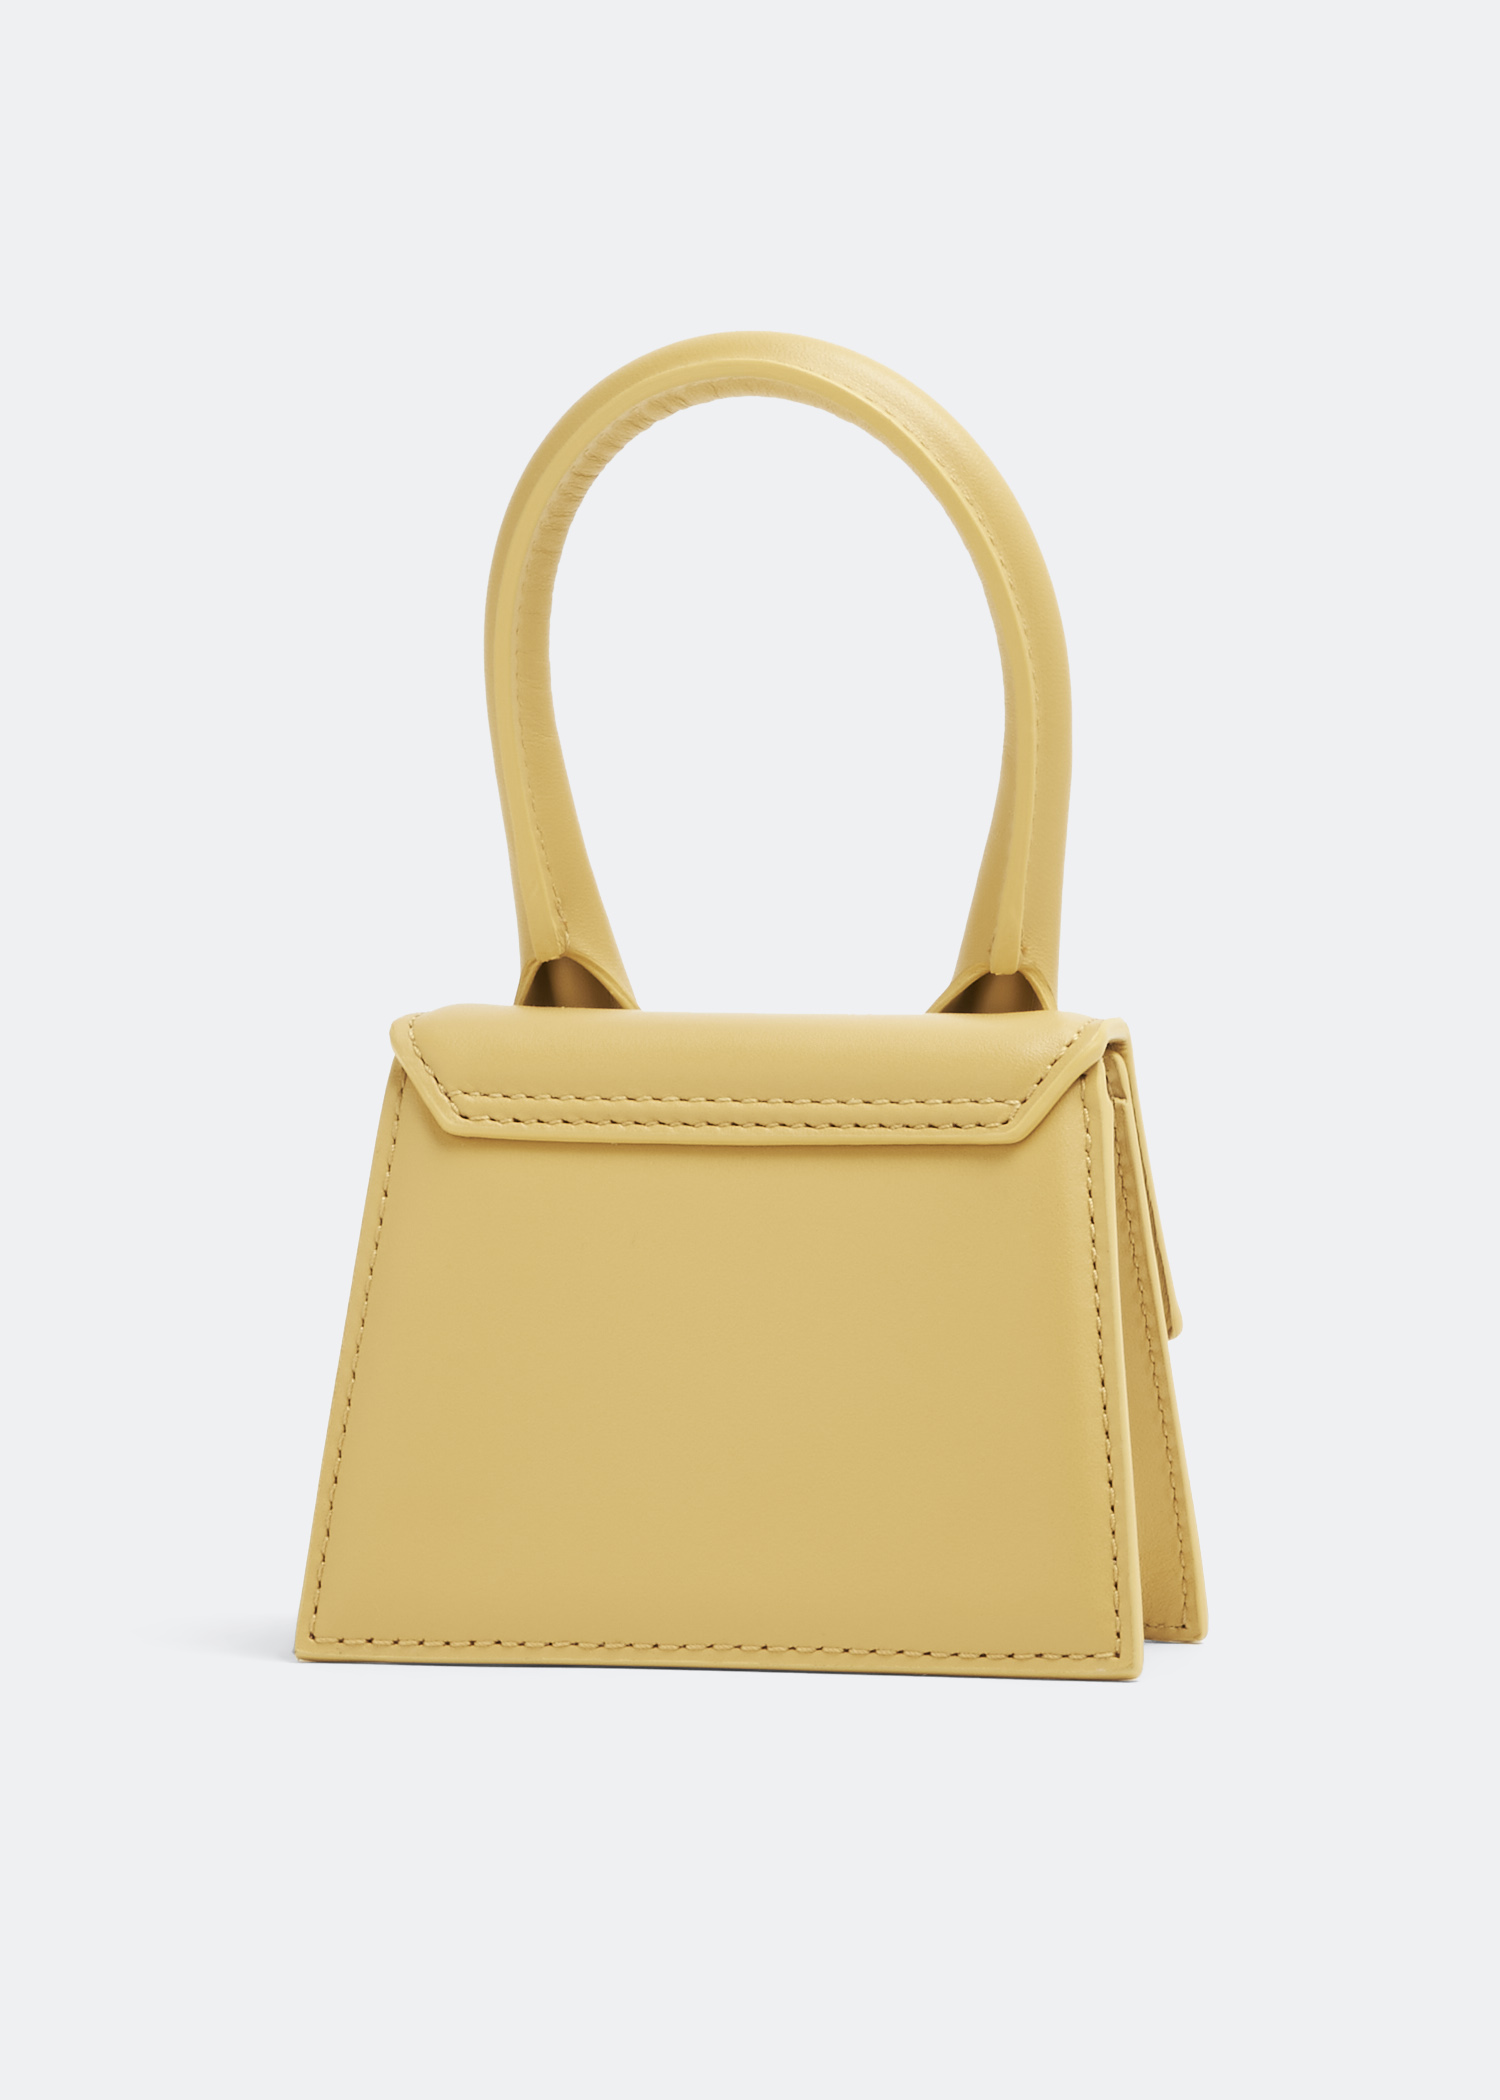 Jacquemus Yellow Suede Le Chiquito Bag